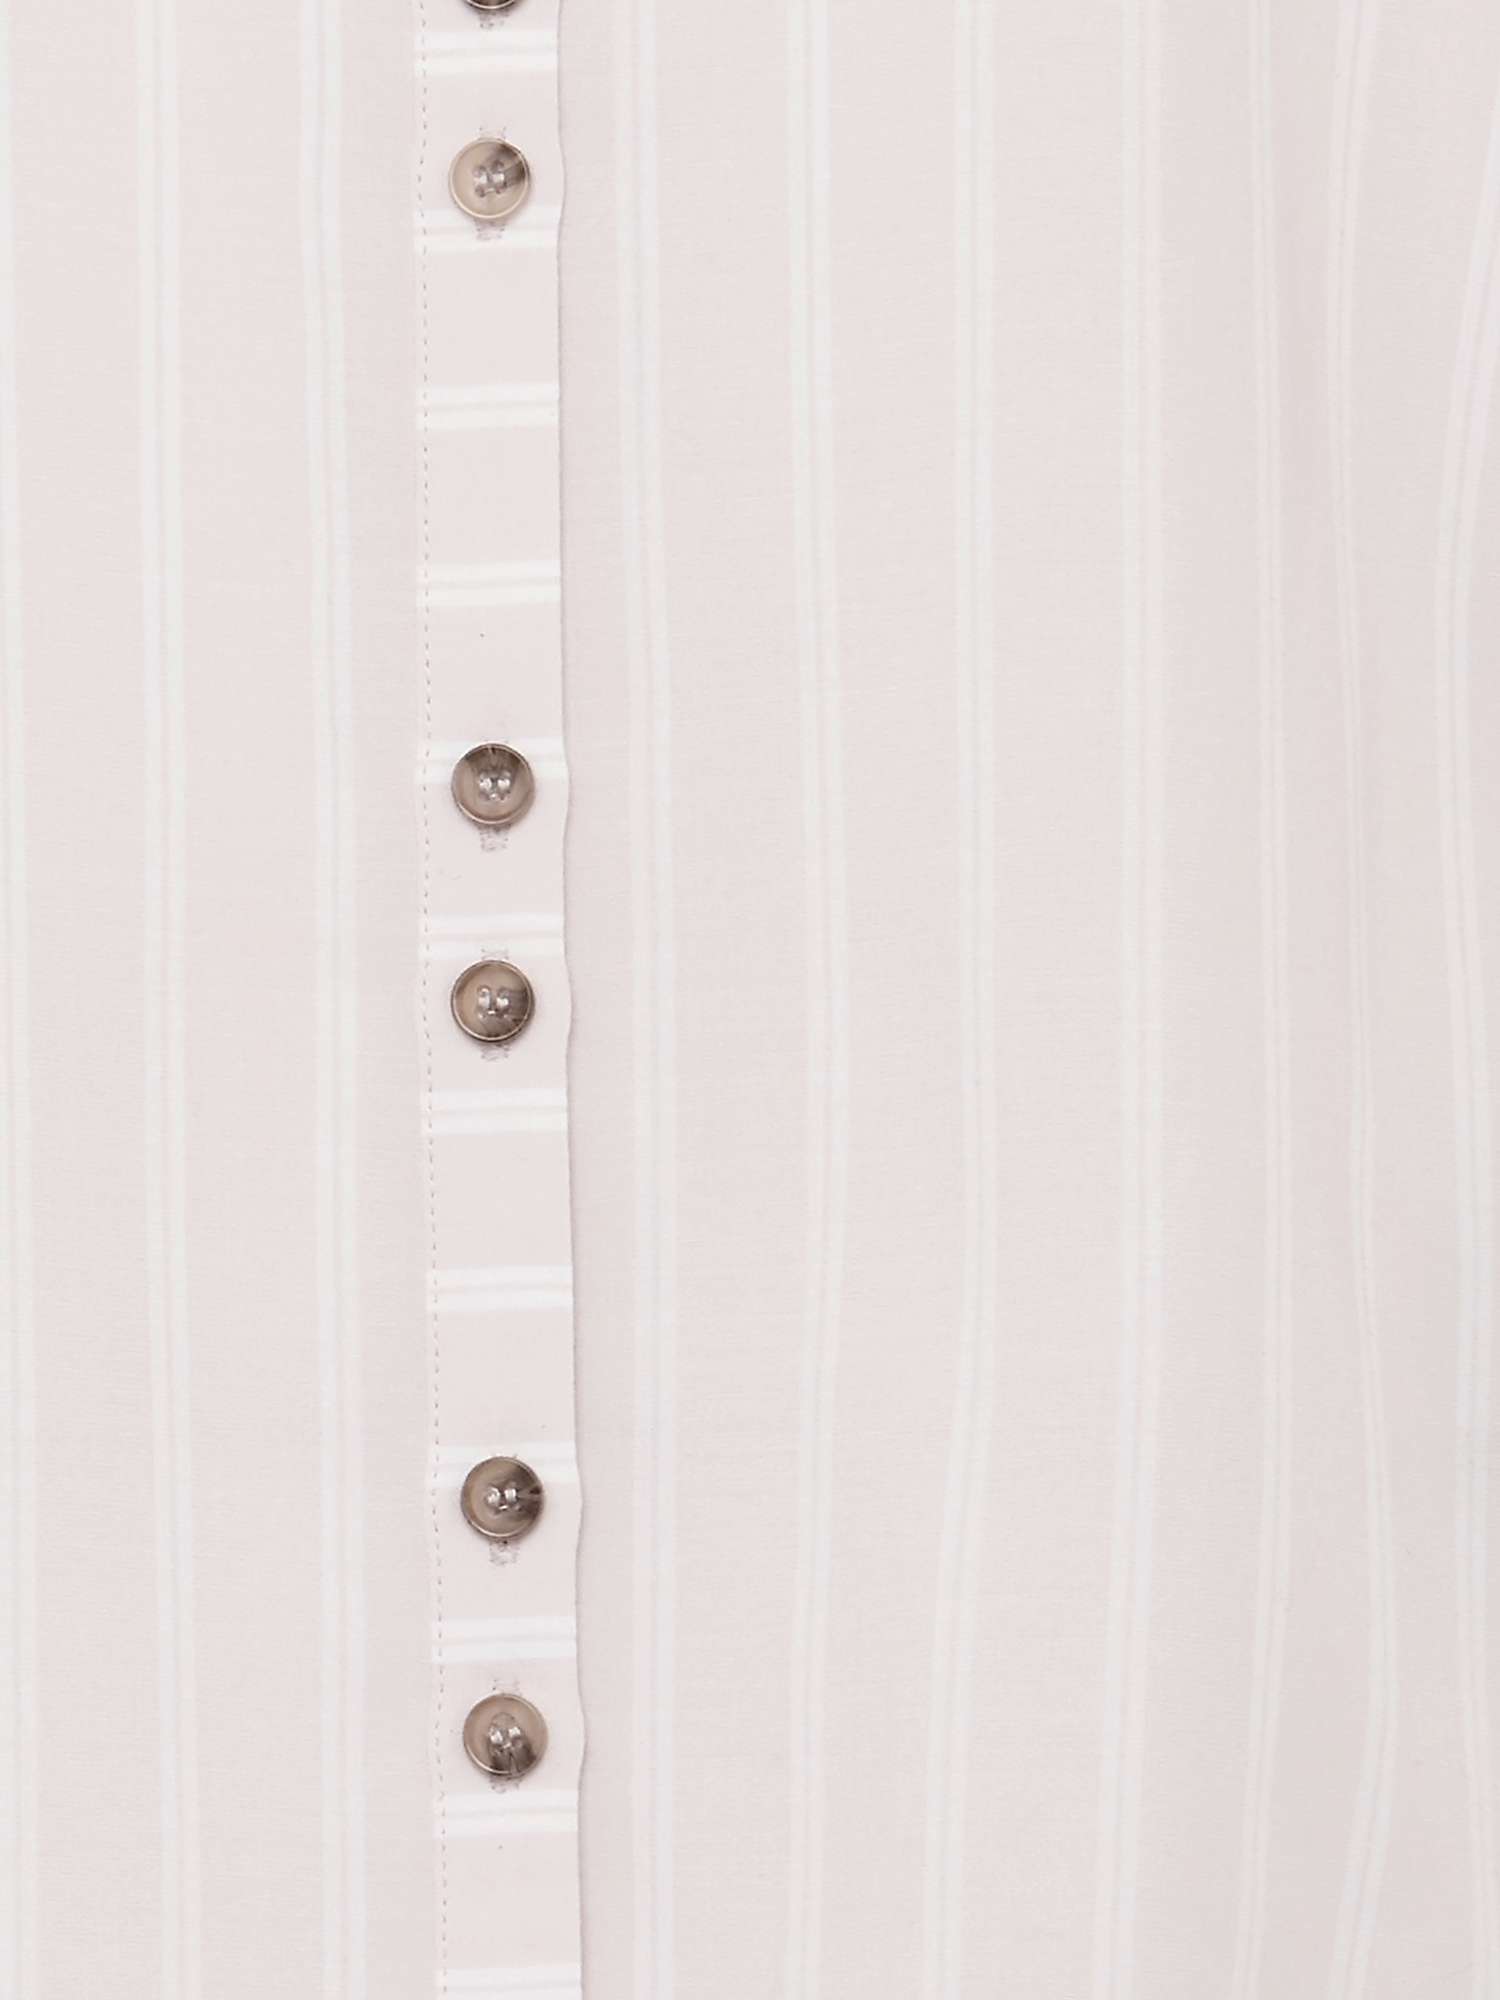 Buy Phase Eight Tazanna Stripe Button Blouse, Pale Pink/Ivory Online at johnlewis.com